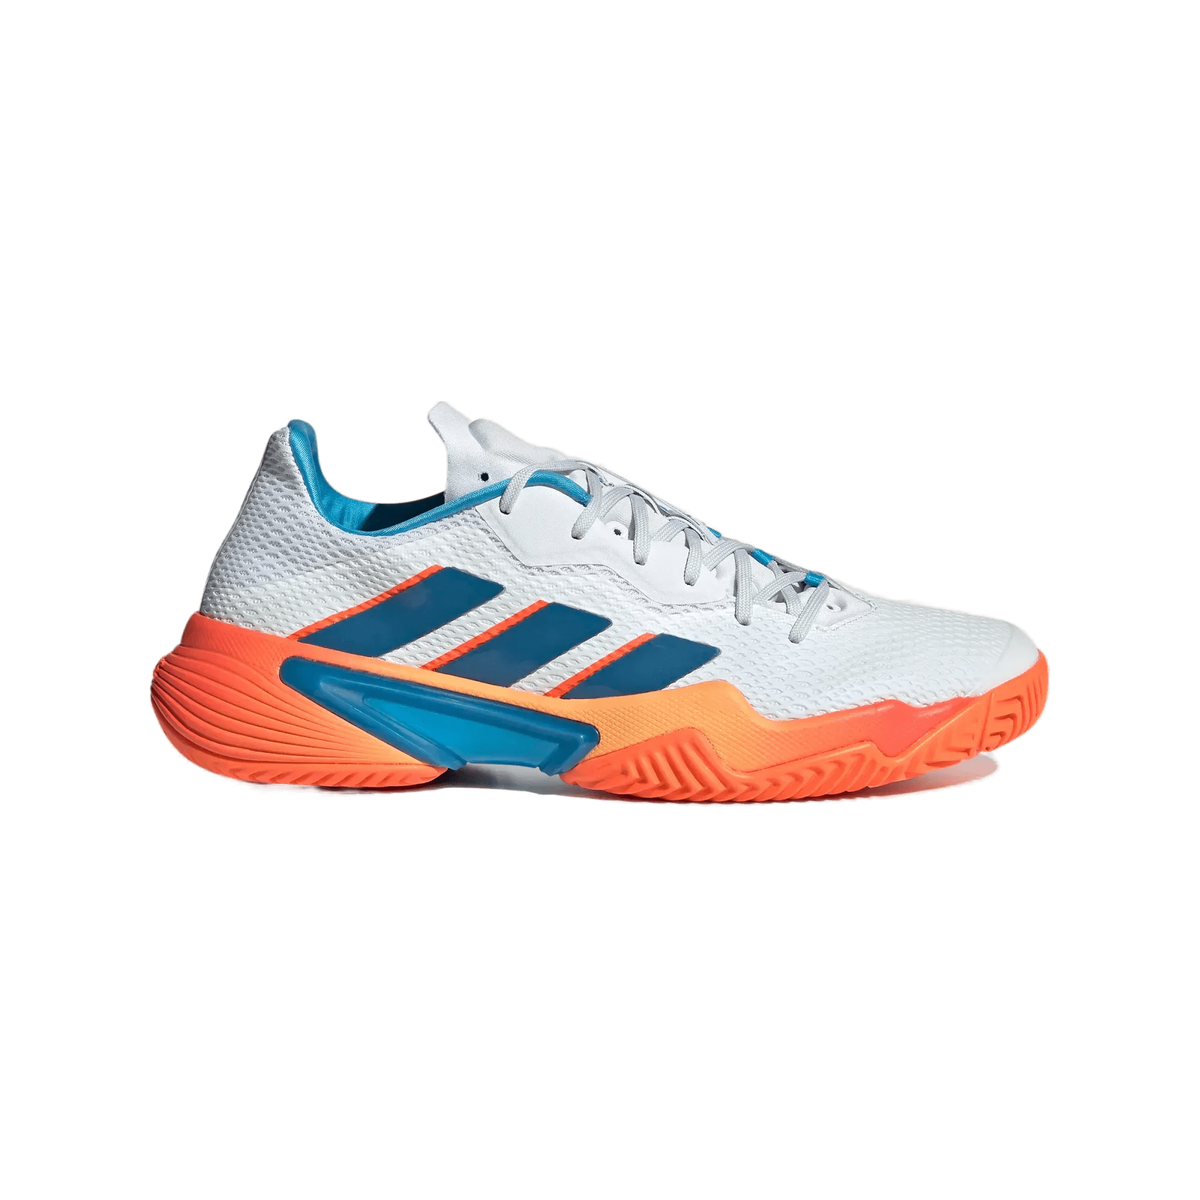 Padel Shoes Review